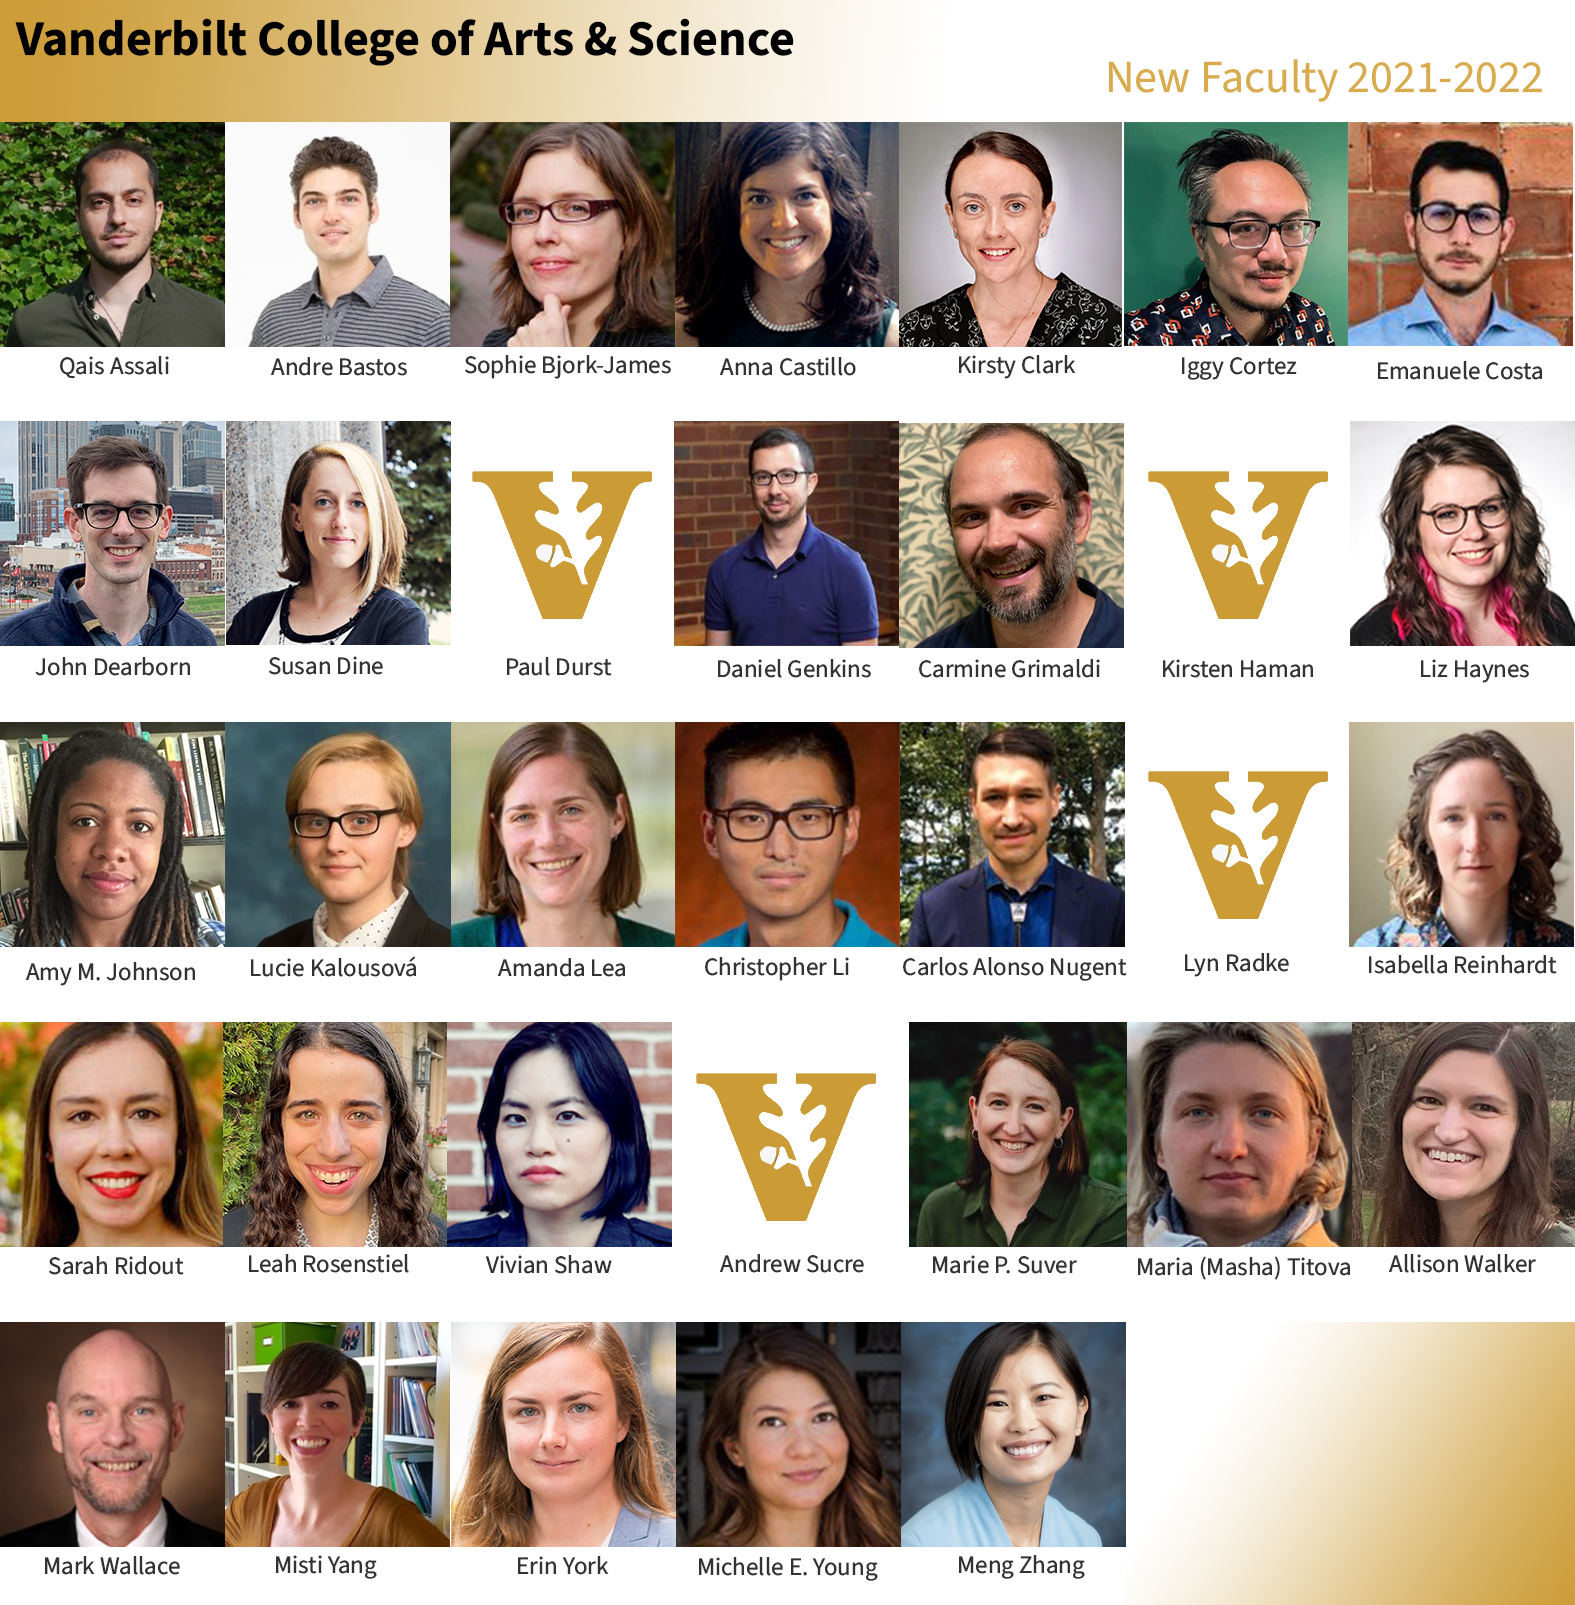 New Faculty 2021-2022